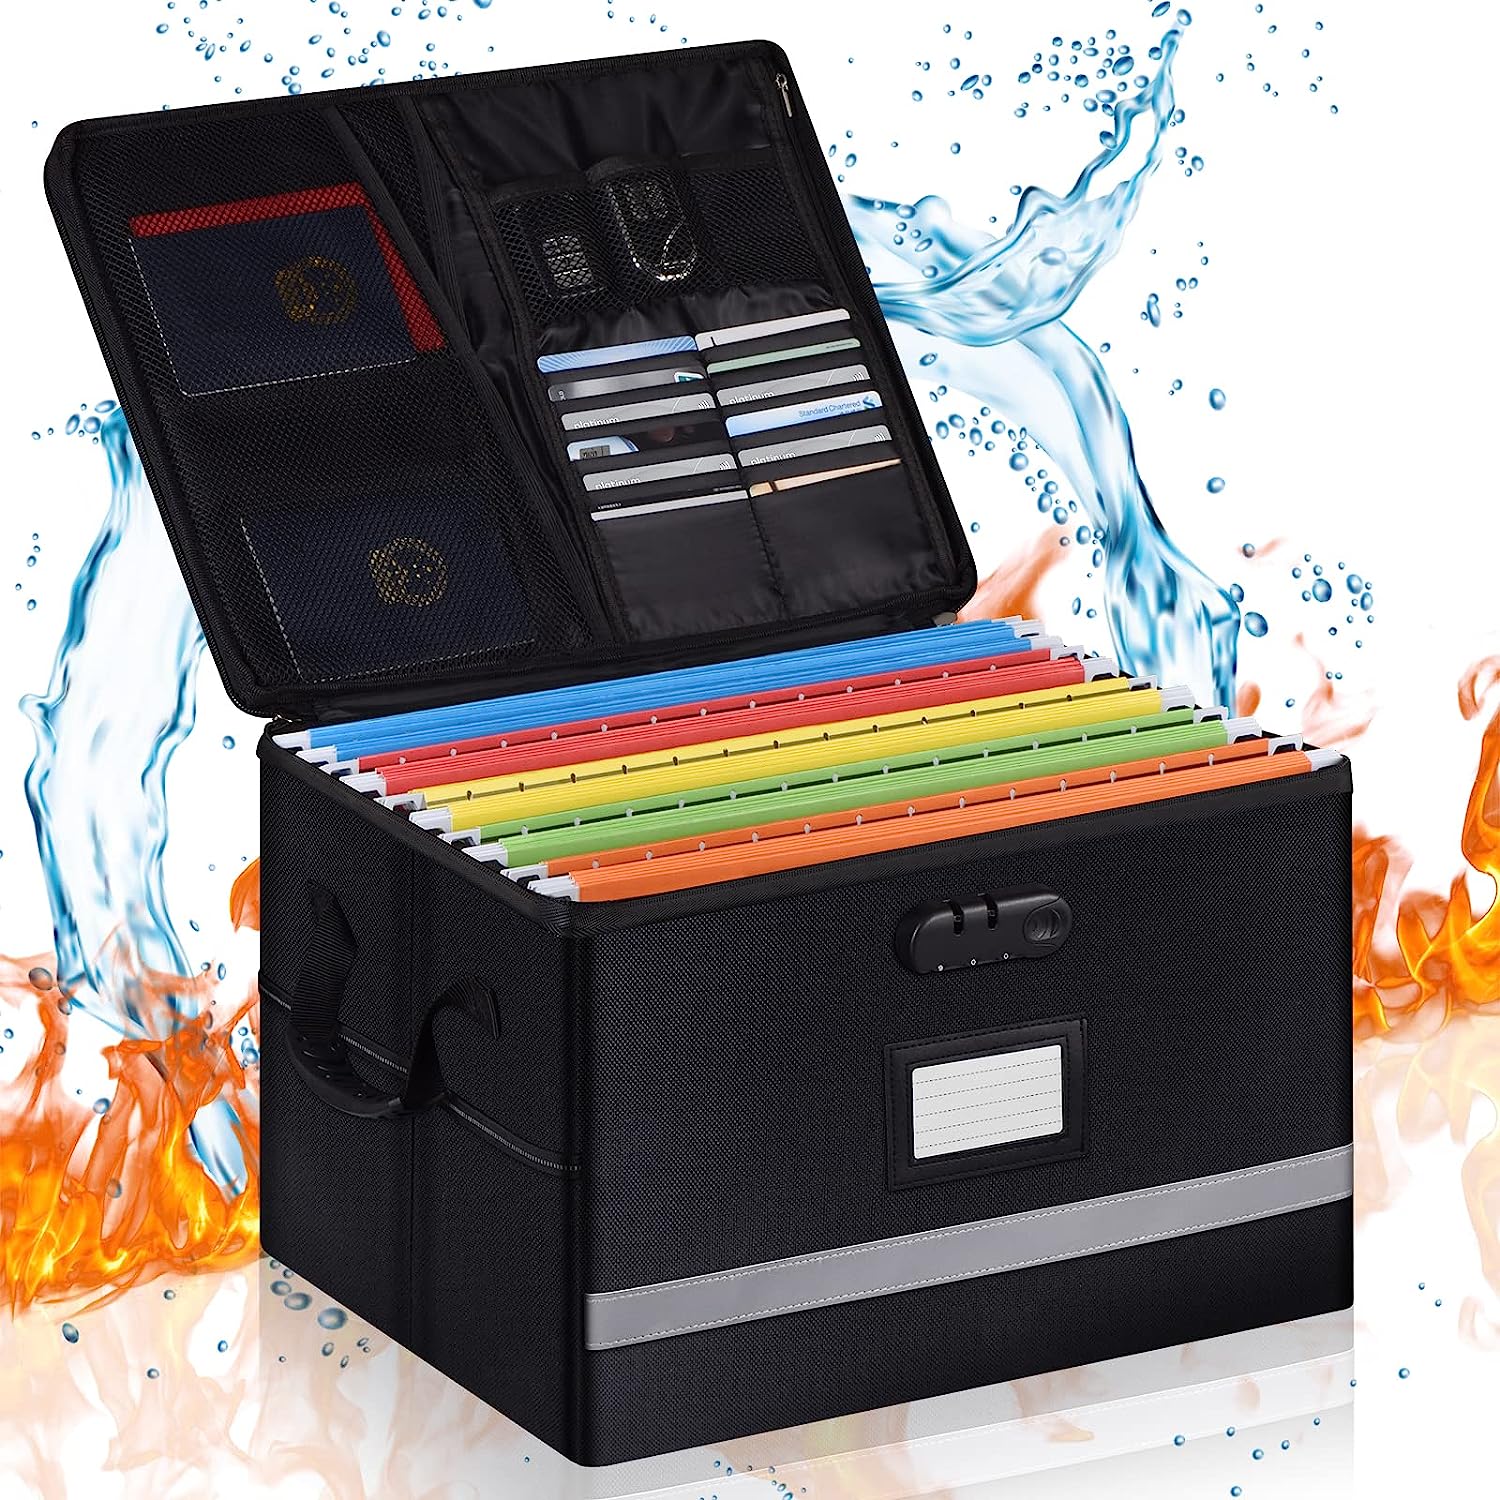 Fireproof Document Box with Built-In Organizer - [...]